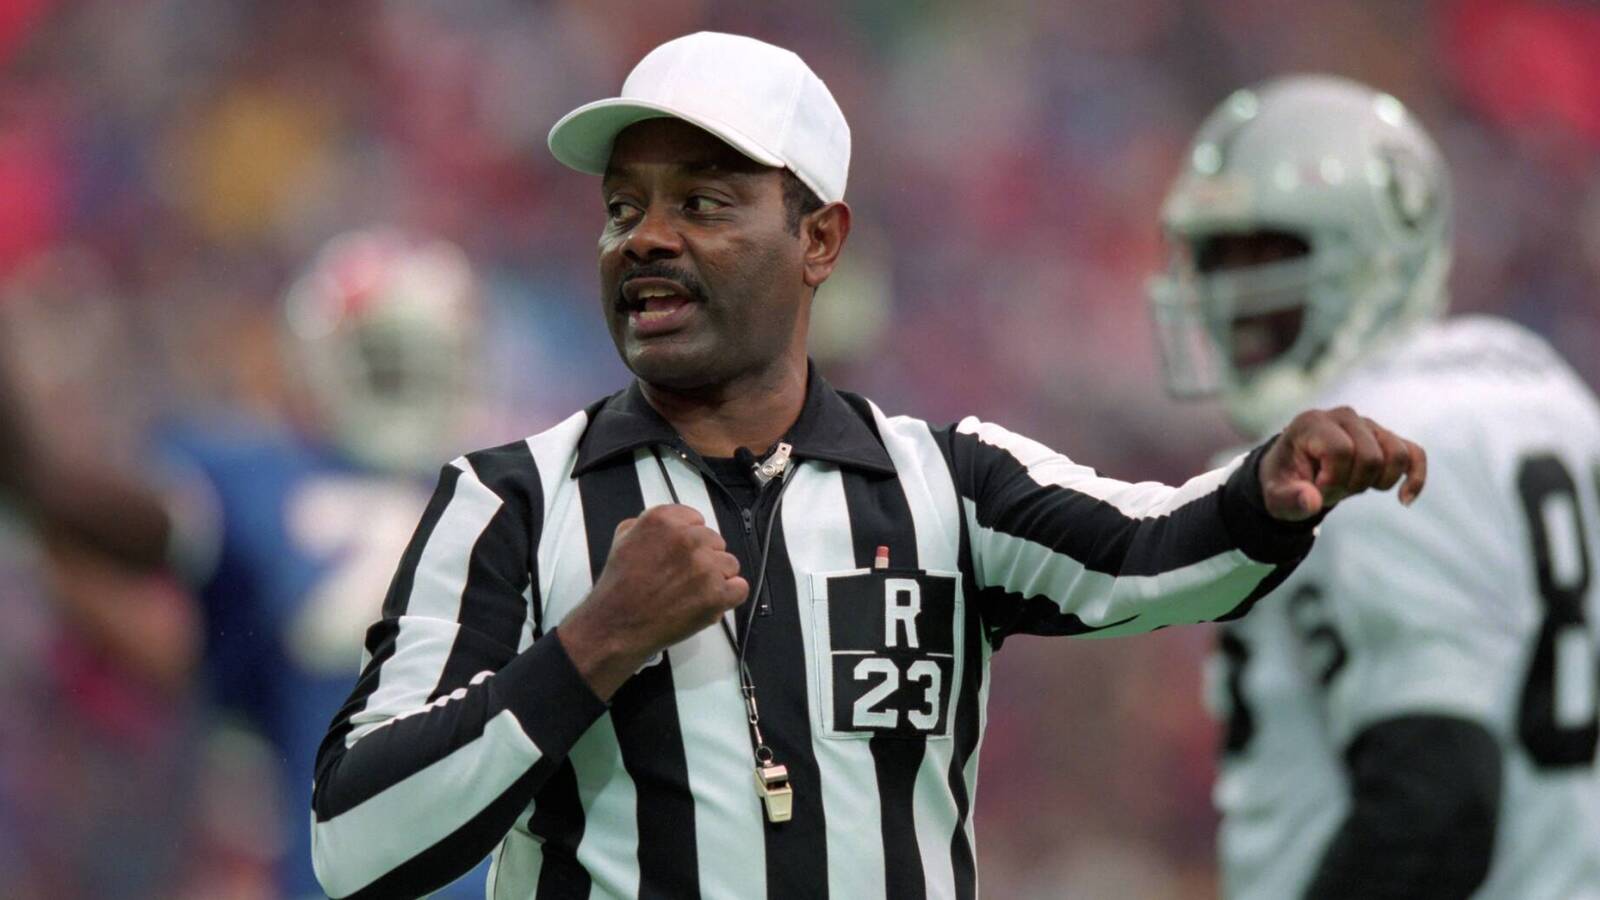 Johnny Grier, NFL’s first Black referee, passes away at 74